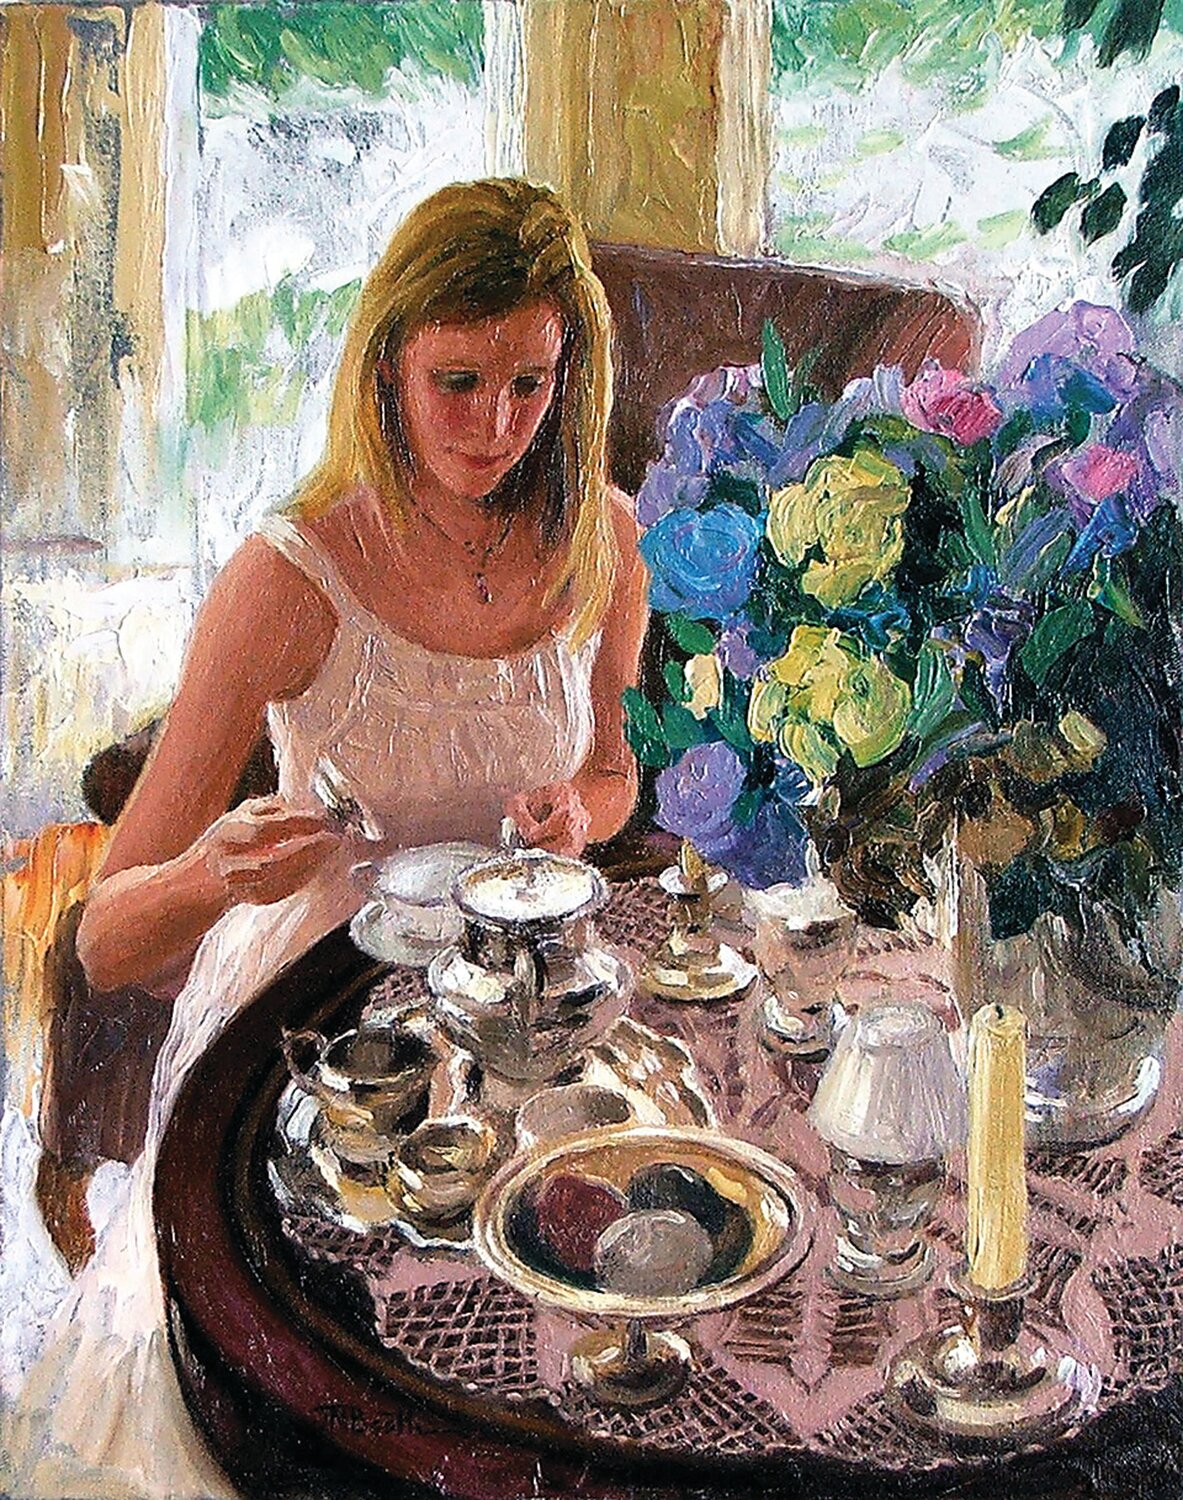 “Afternoon Tea” is an oil painting by John N. Booth.